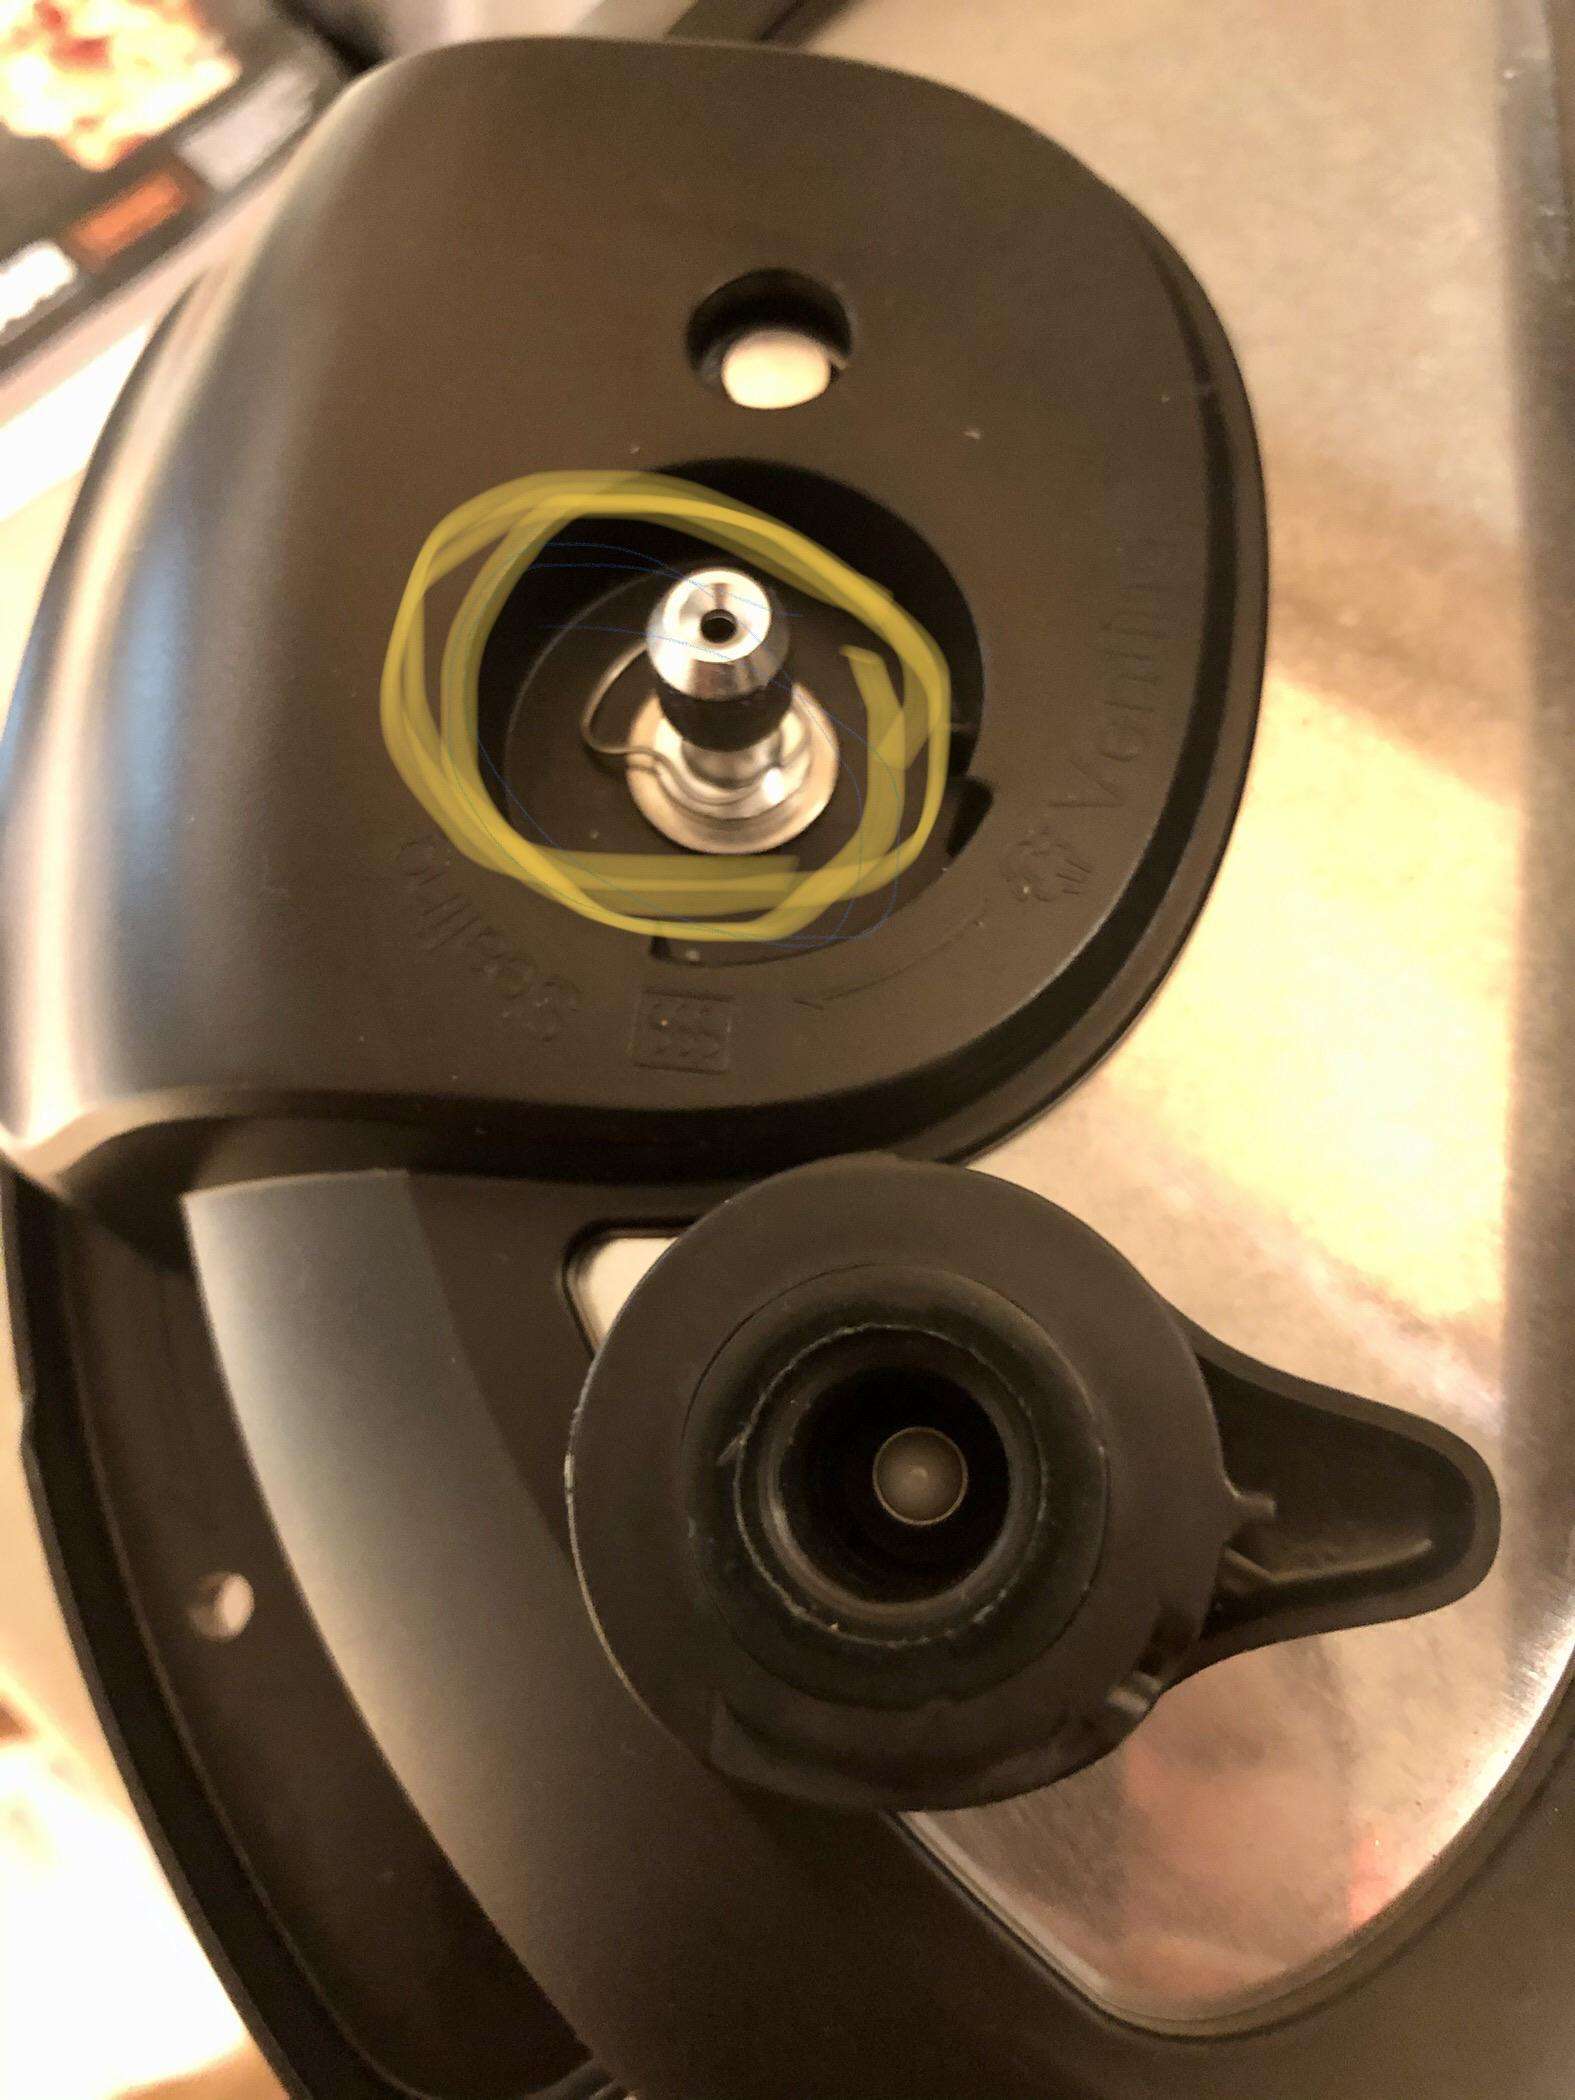 Instant pot steam release valve loose when set to sealing ...